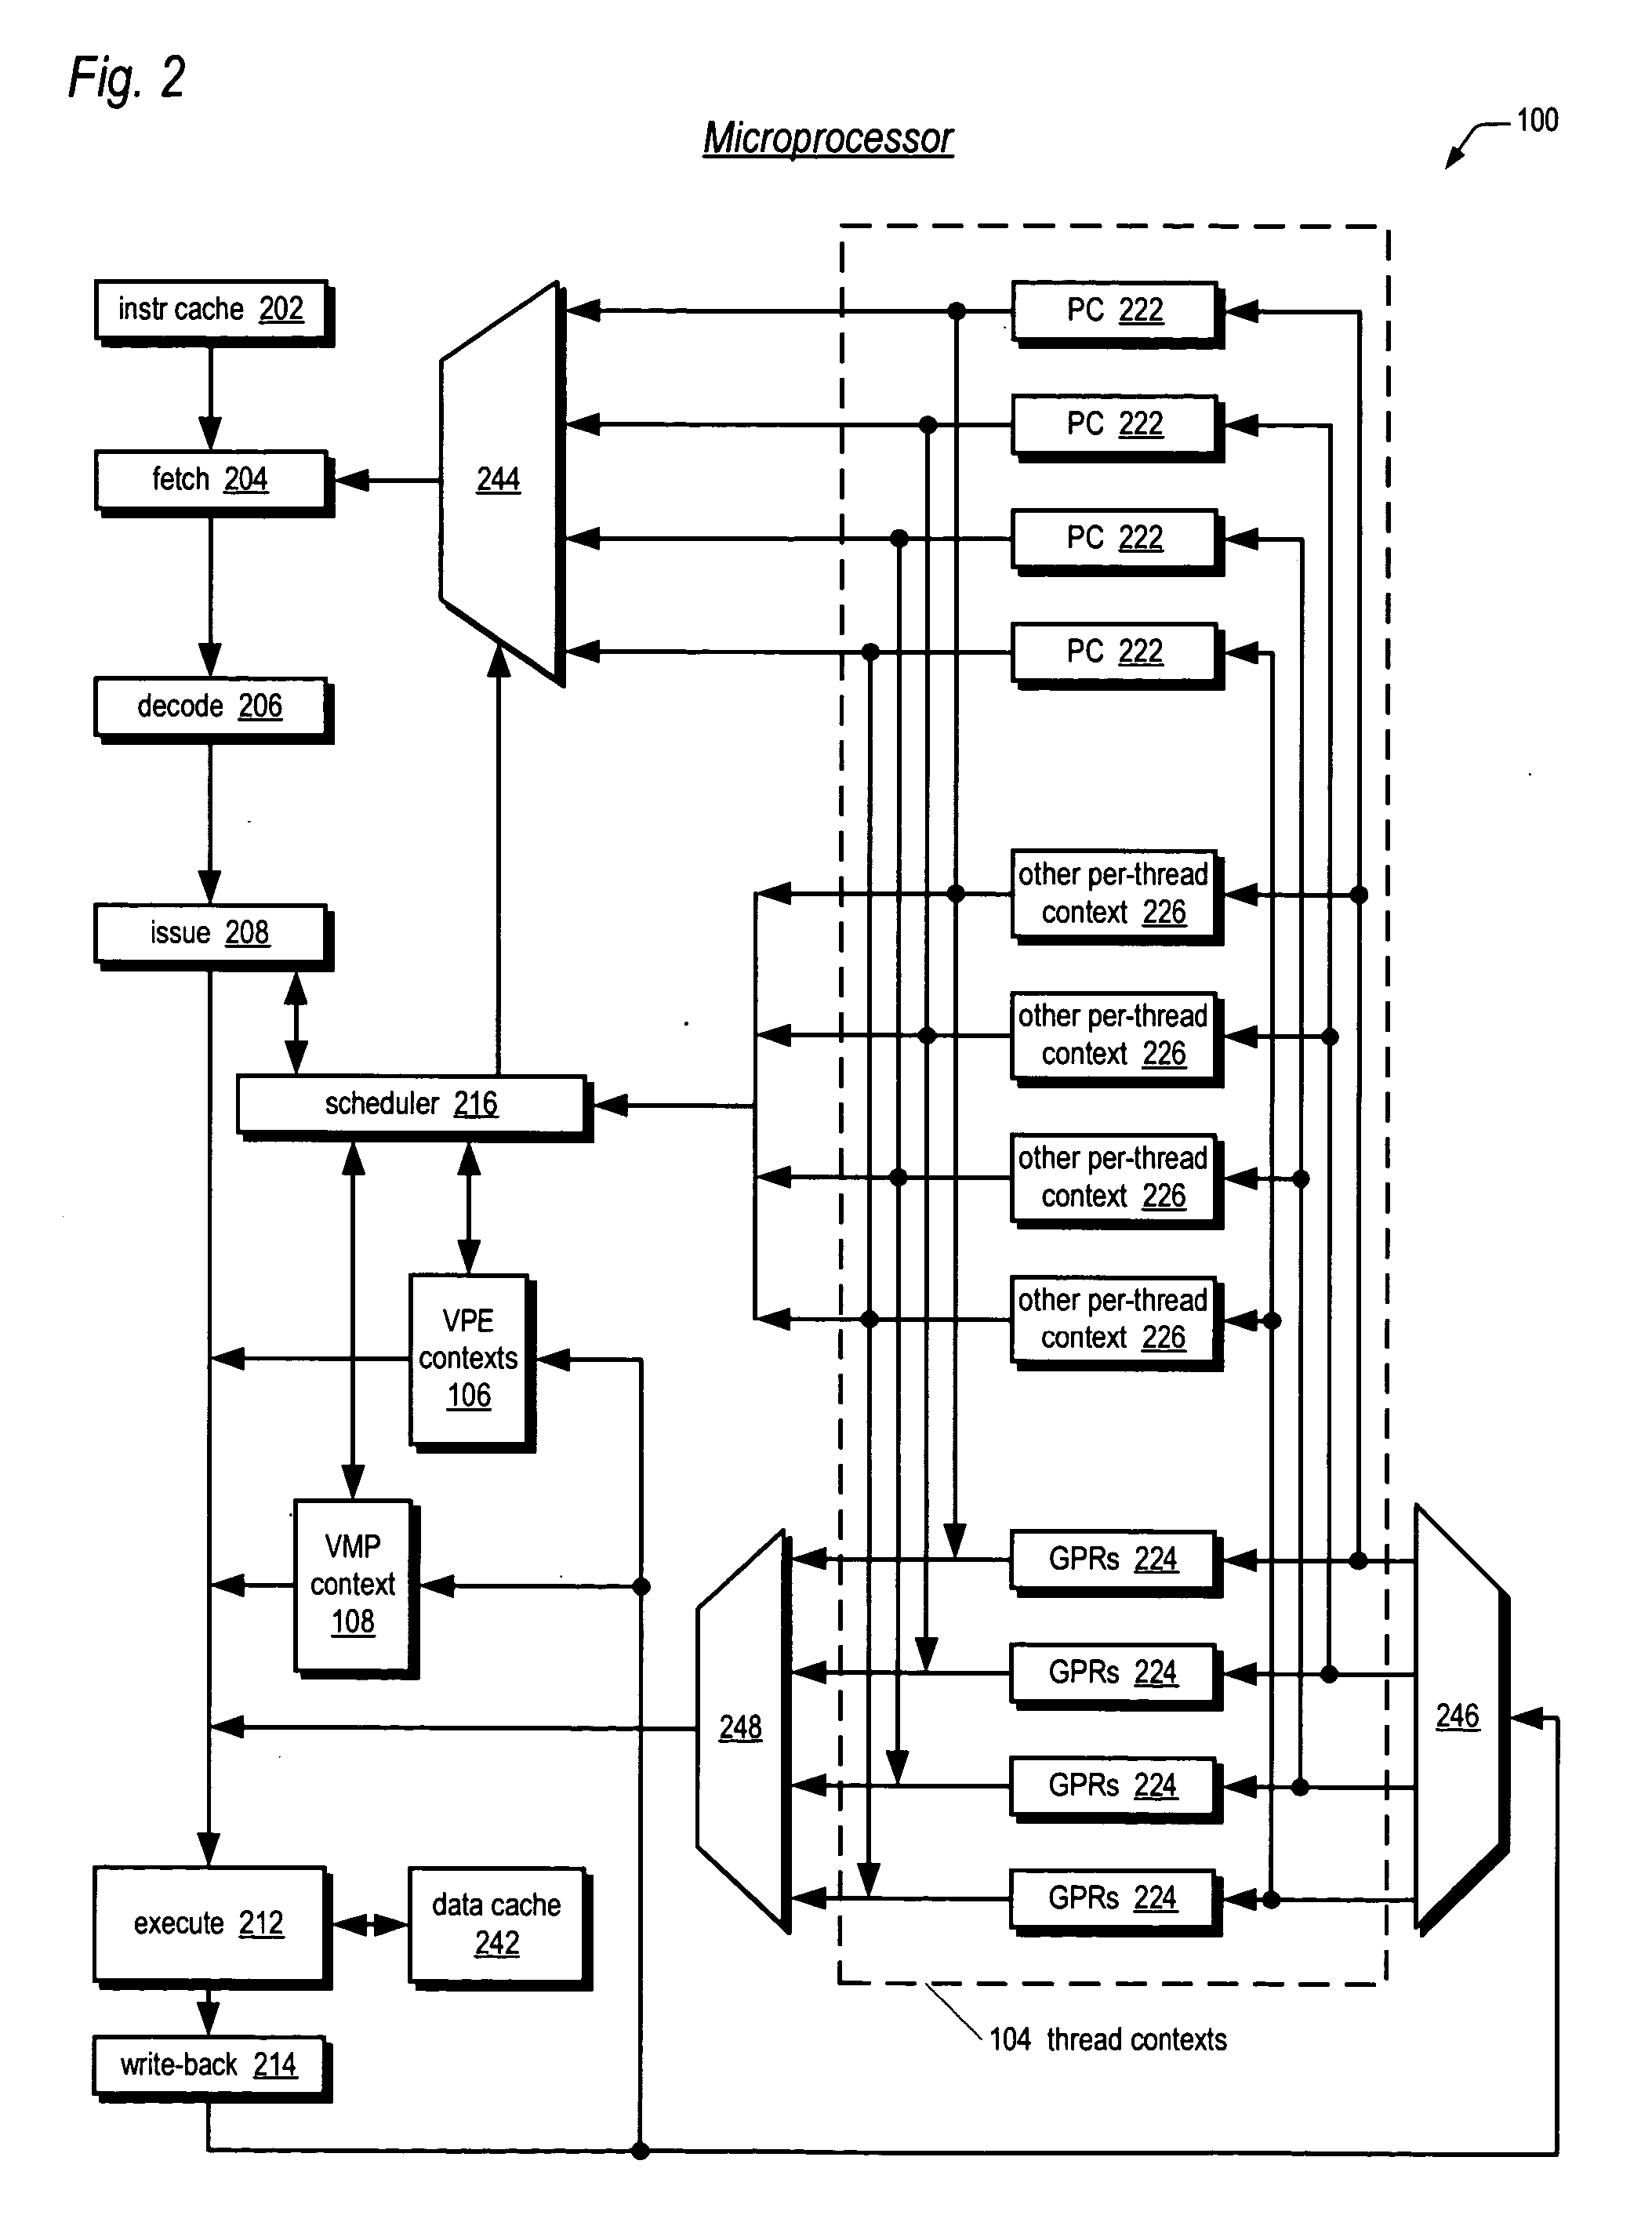 Apparatus, method, and instruction for software management of multiple computational contexts in a multithreaded microprocessor